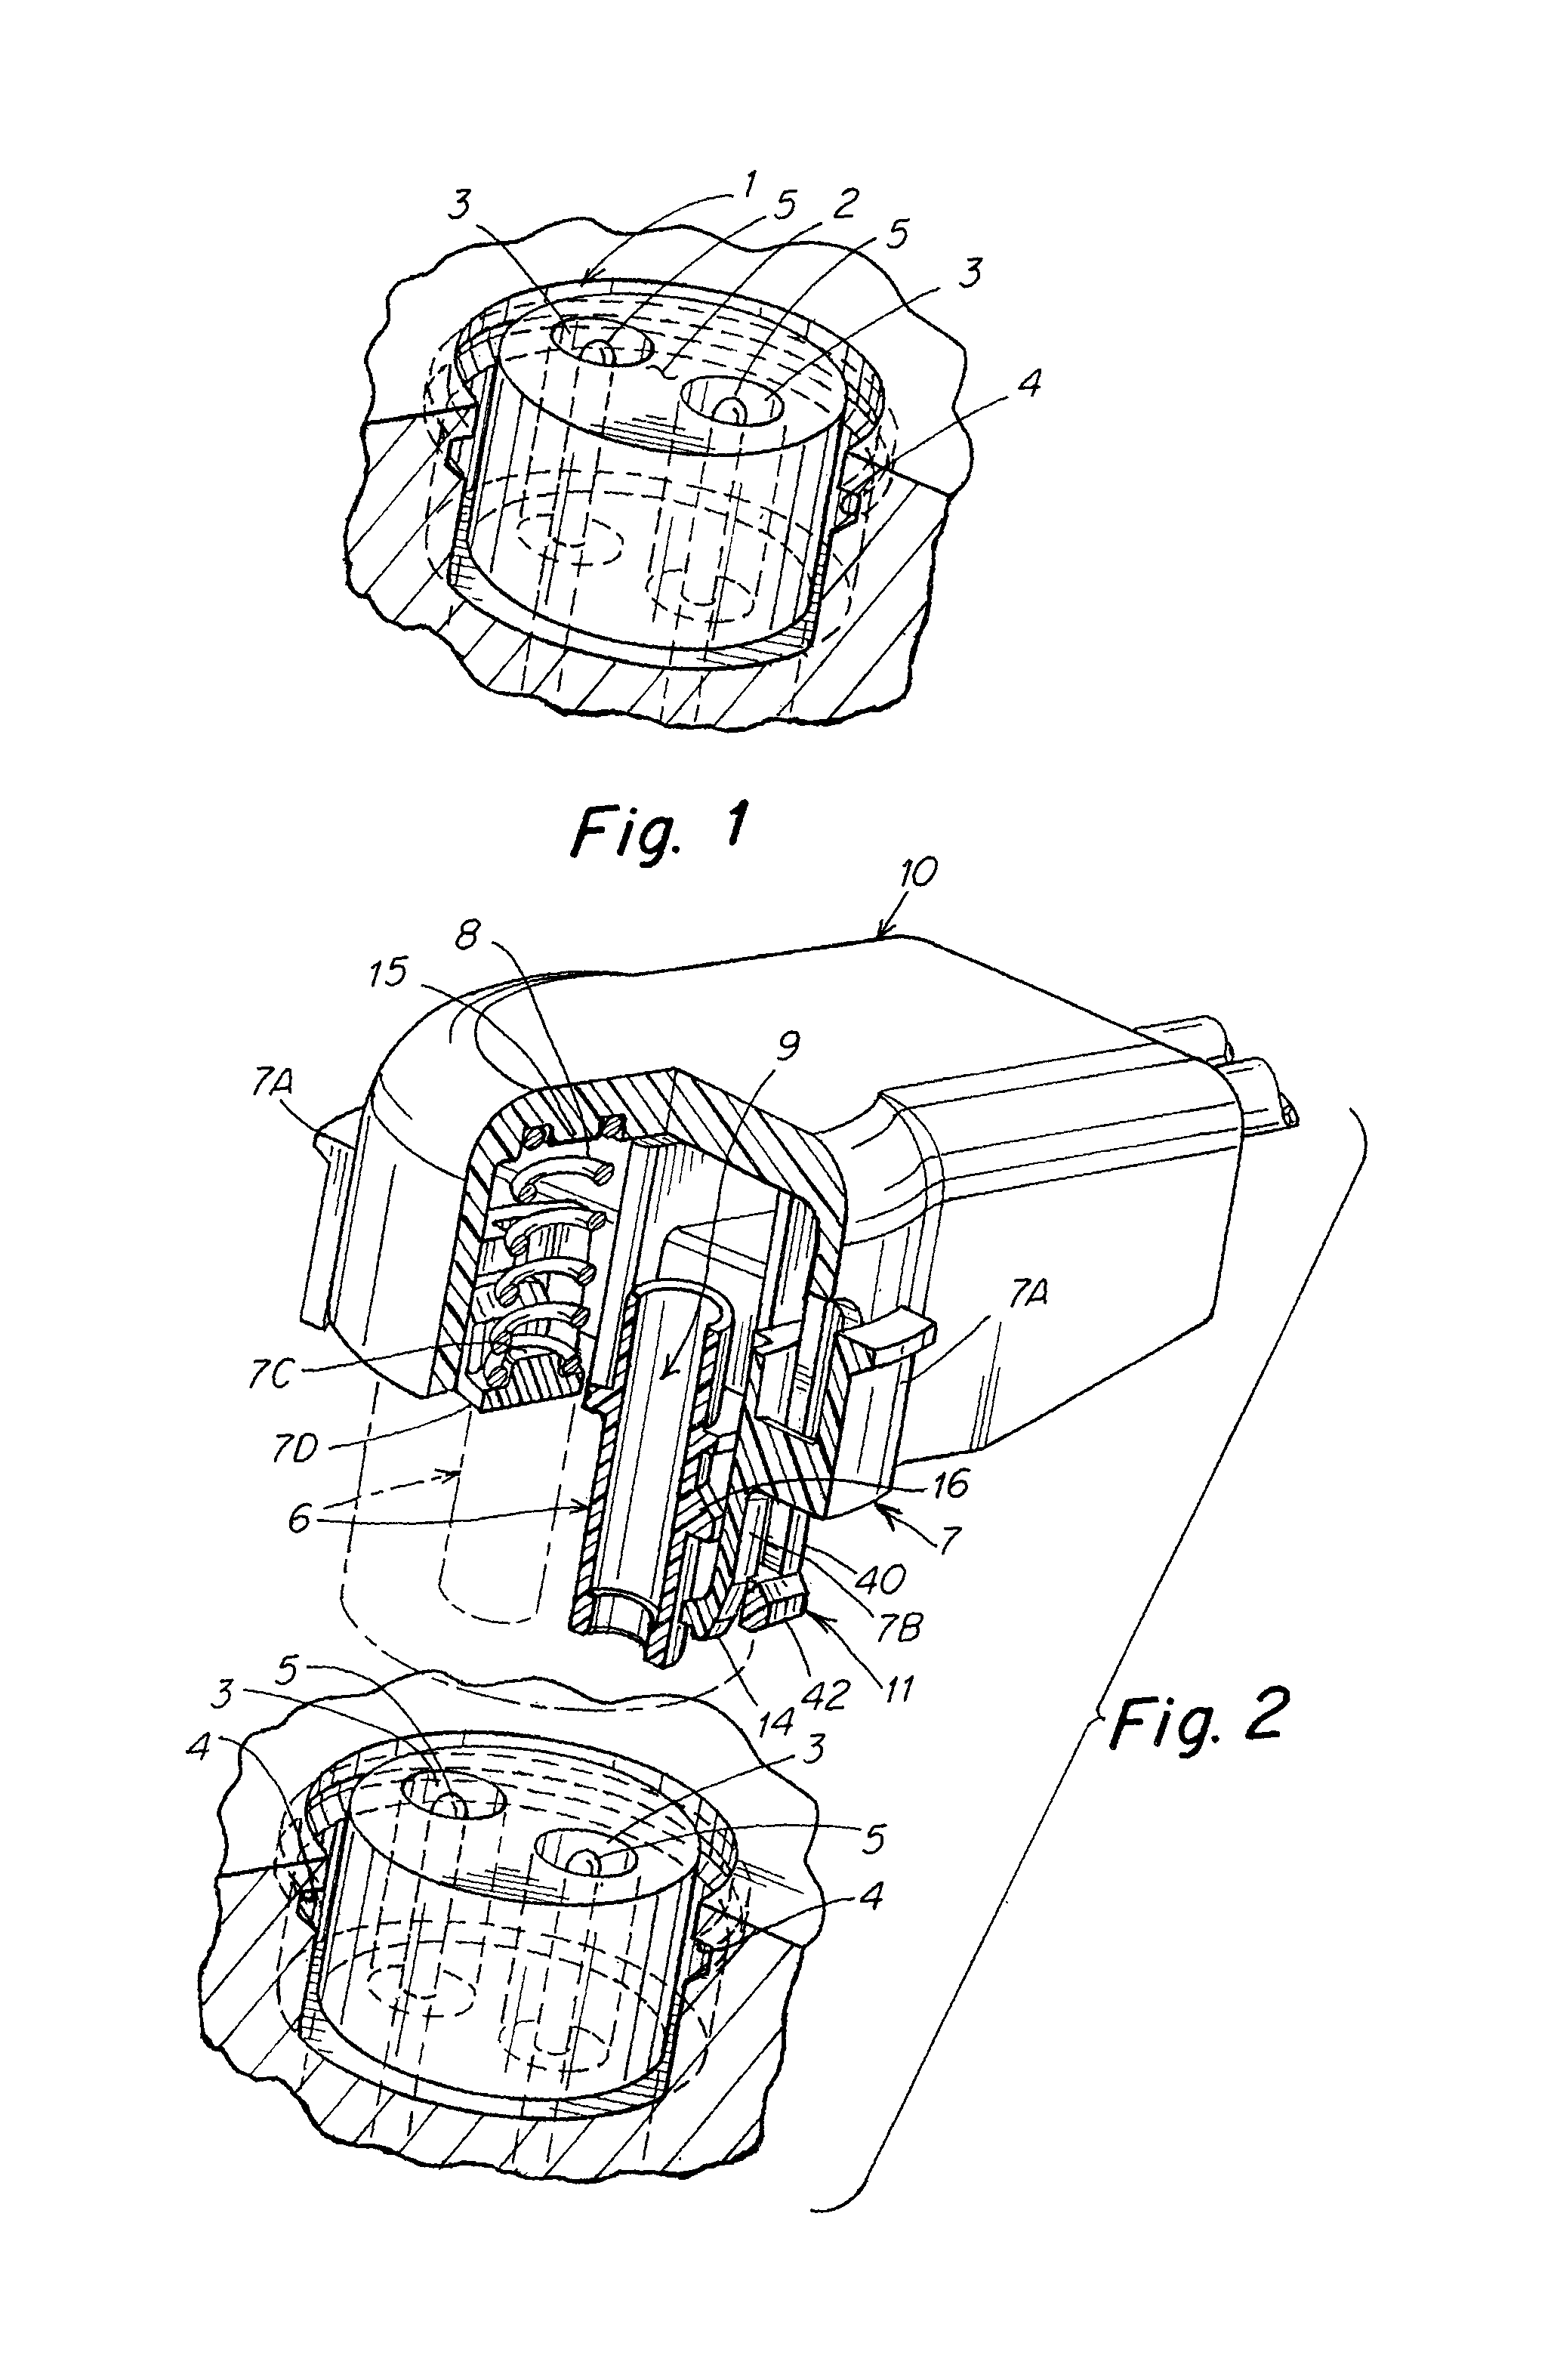 Self-rejecting automotive harness connector